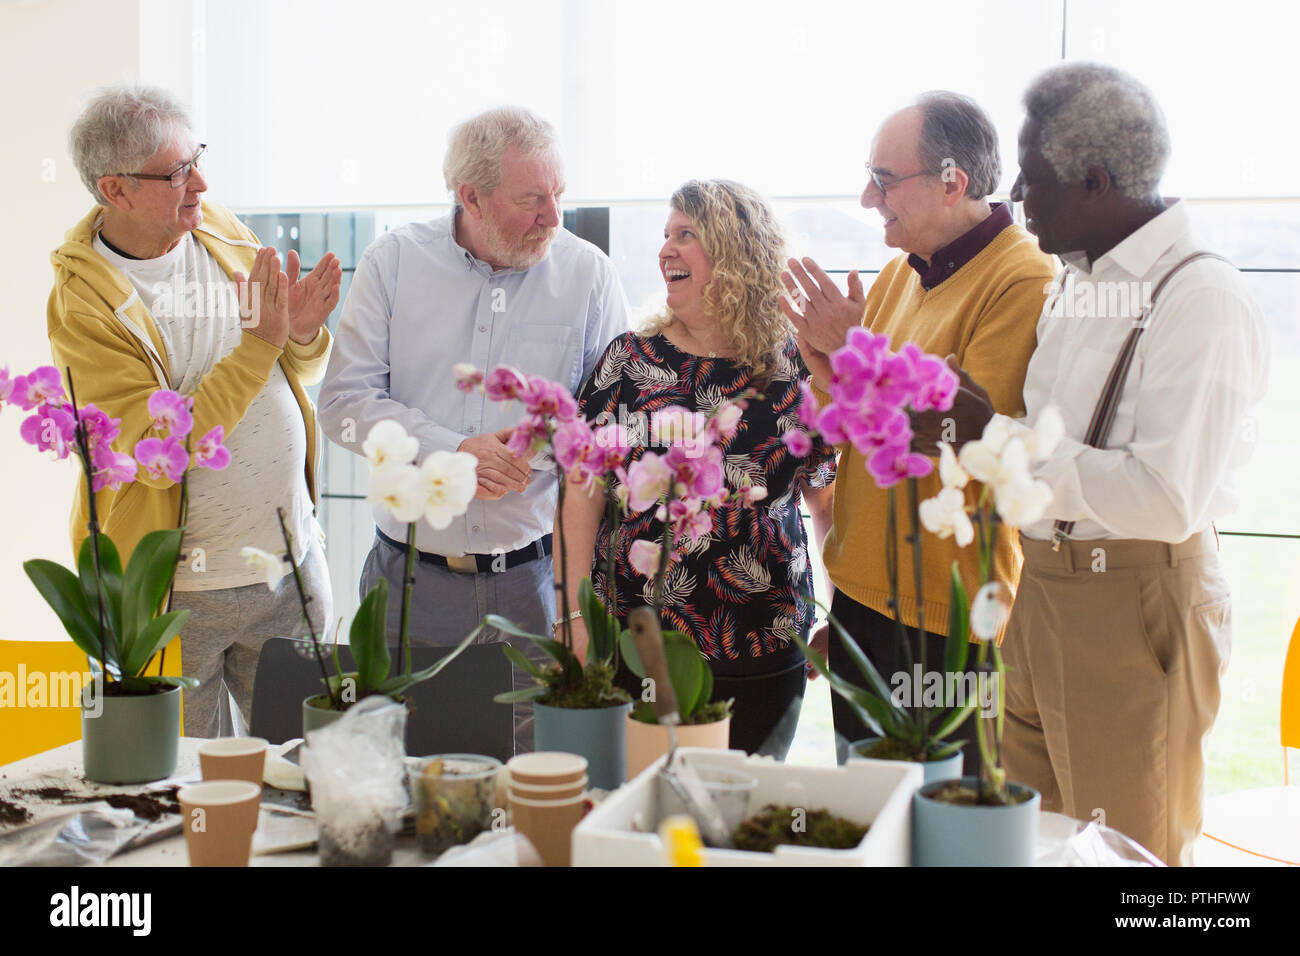 Active senior men clapping for female instructor in flower arranging class Stock Photo